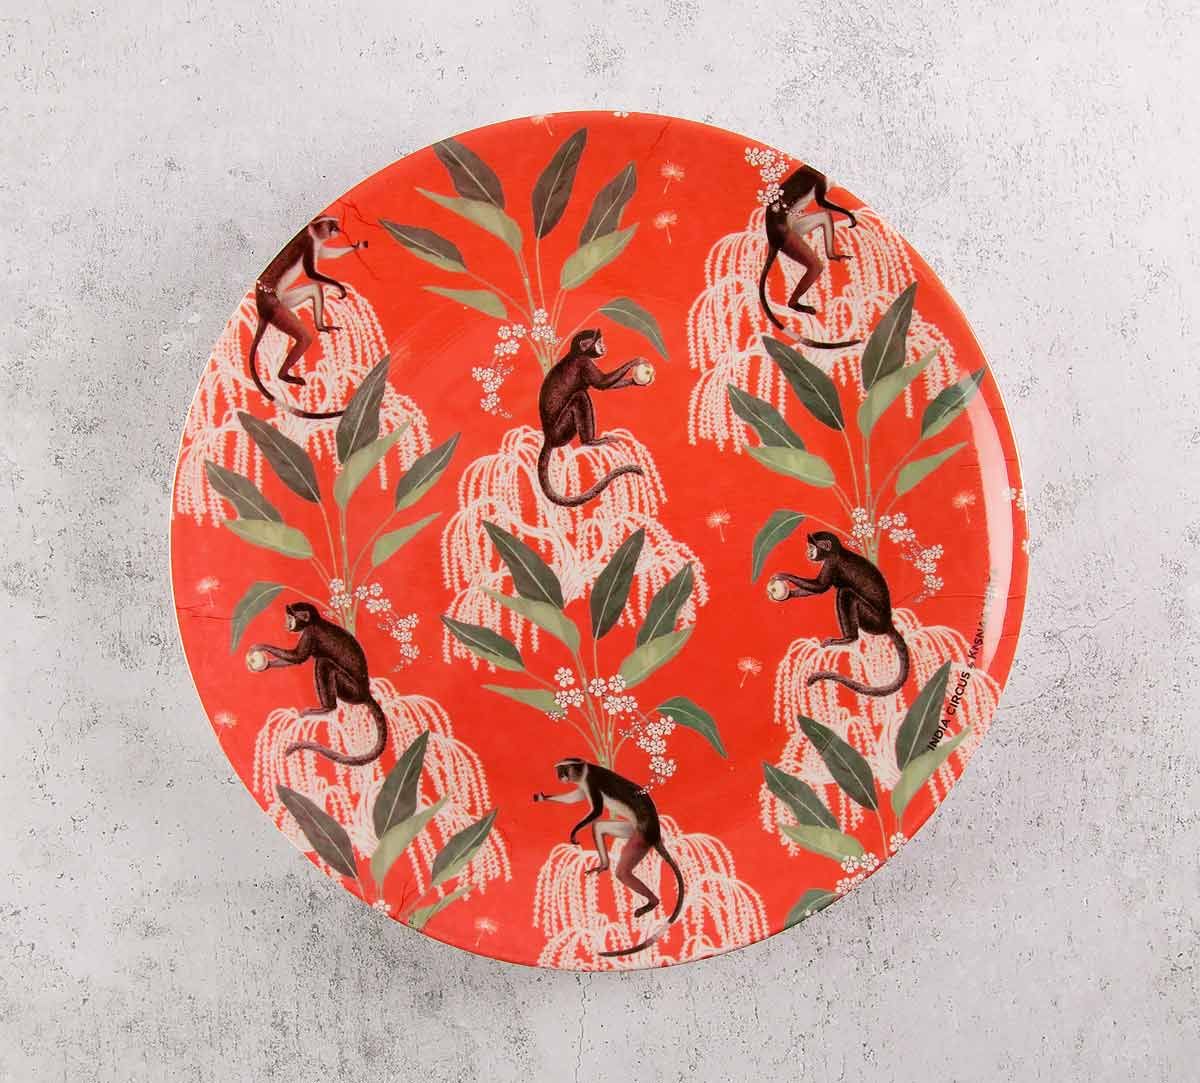 India Circus Monkey Games 8 inch Decorative and Snacks Platter